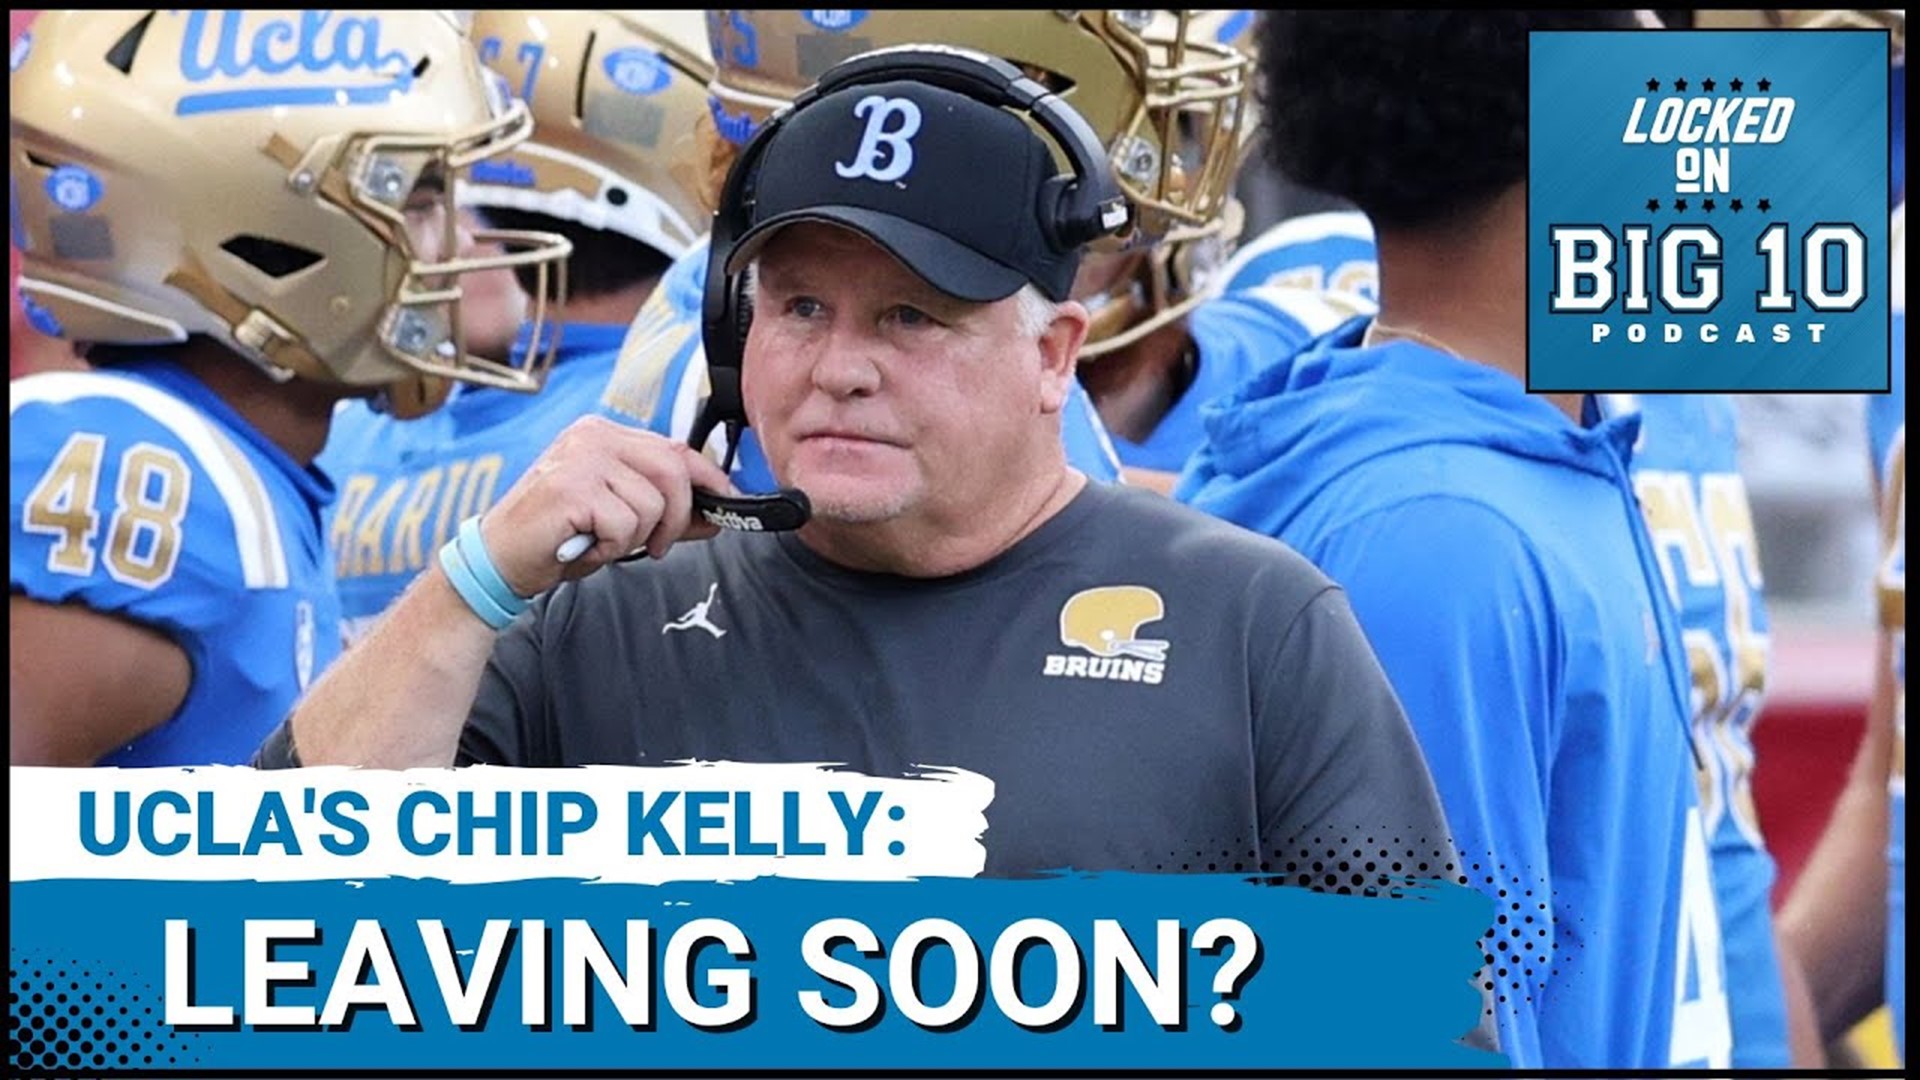 Will UCLA Coach Chip Kelly be Around for Big 10 Play? | kvue.com